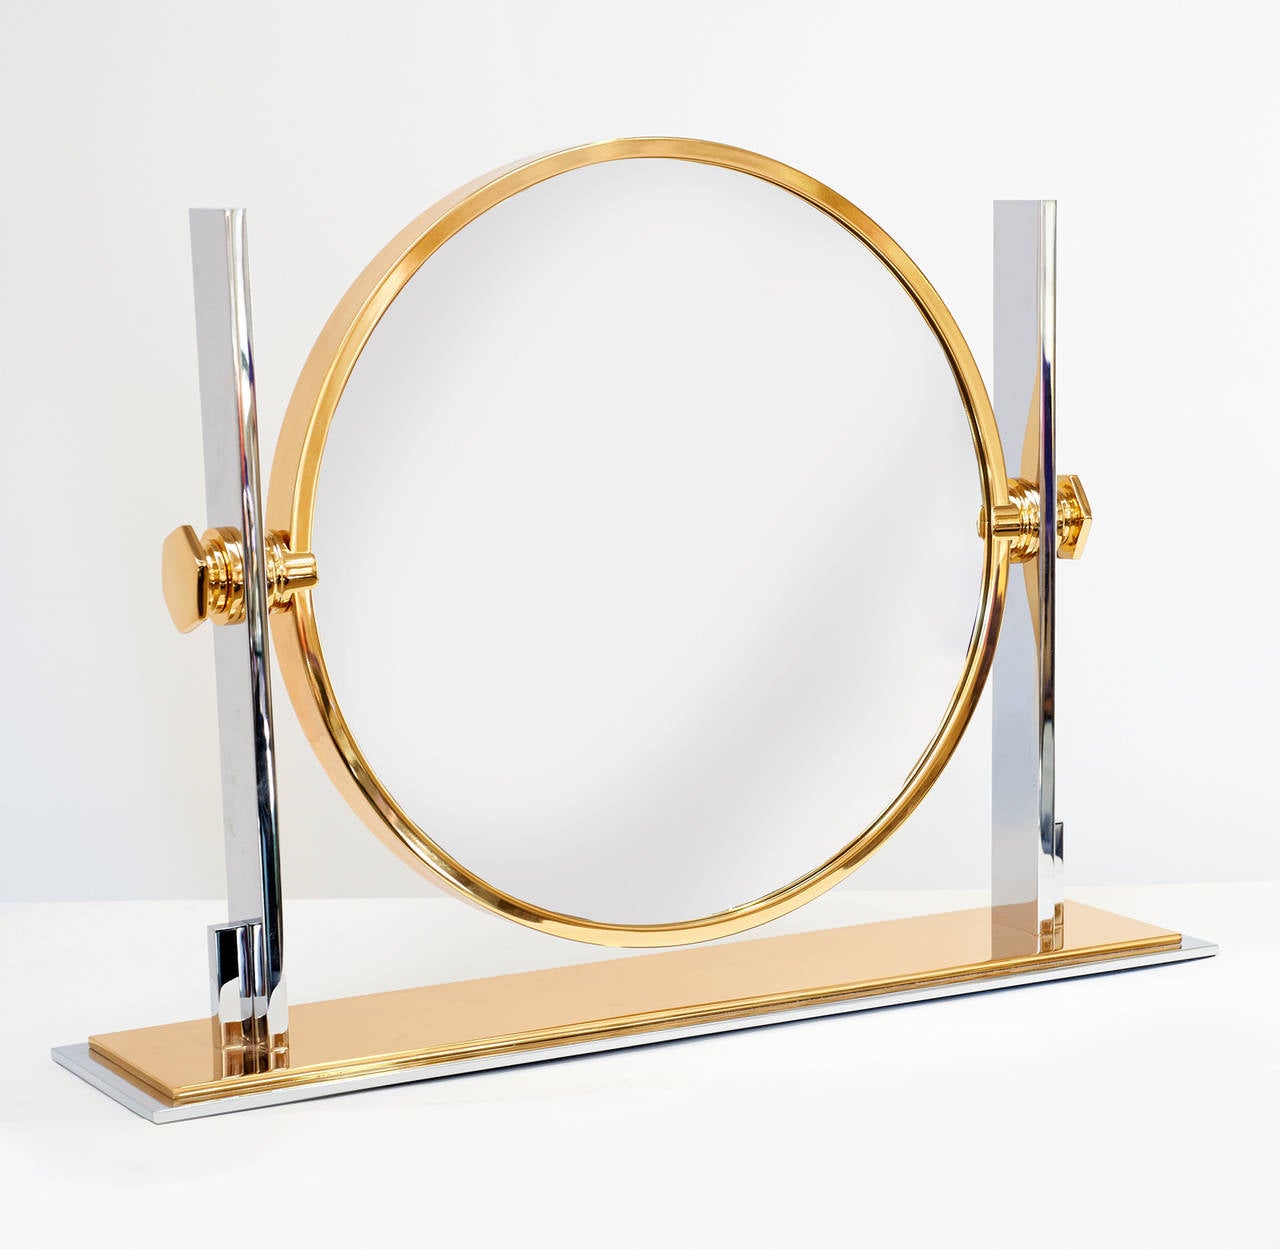 Precision crafted polished chrome and brass tabletop vanity mirror. Rotational frame holds standard and convex magnified mirrors. By Karl Springer, American, circa 1980. NYDC